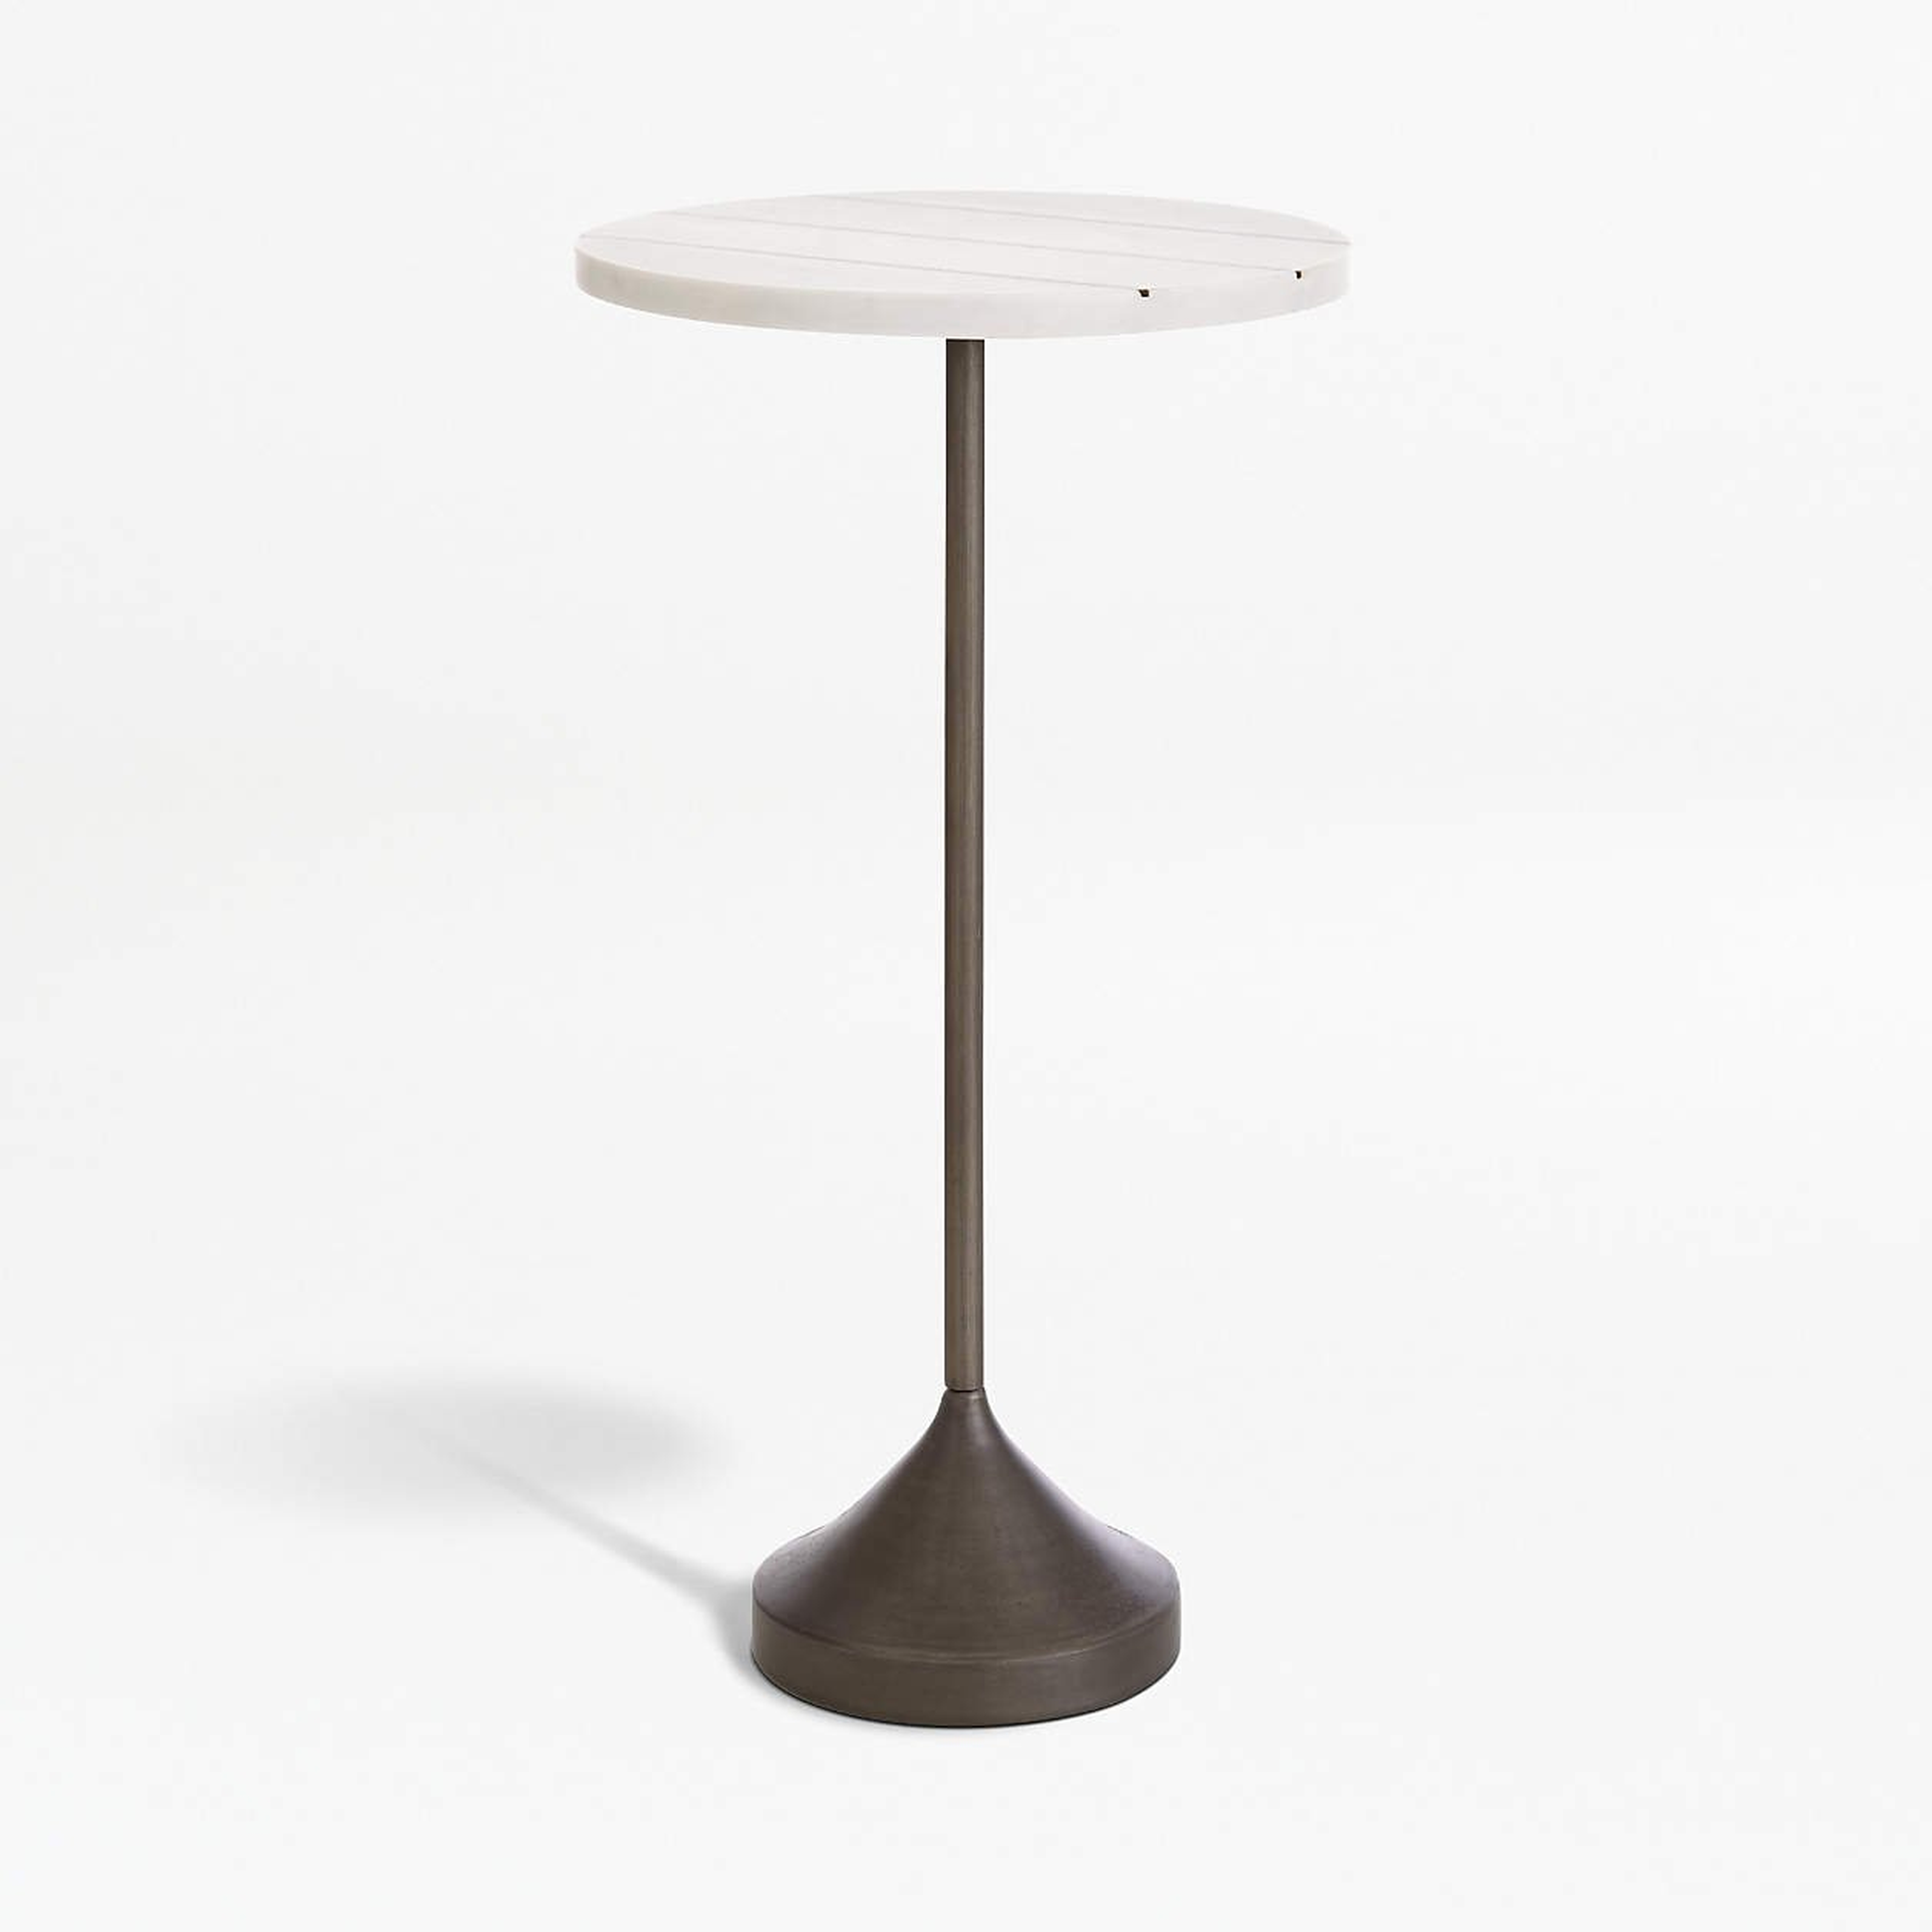 Prost Tall Brass and Marble Round Drink Table - Crate and Barrel